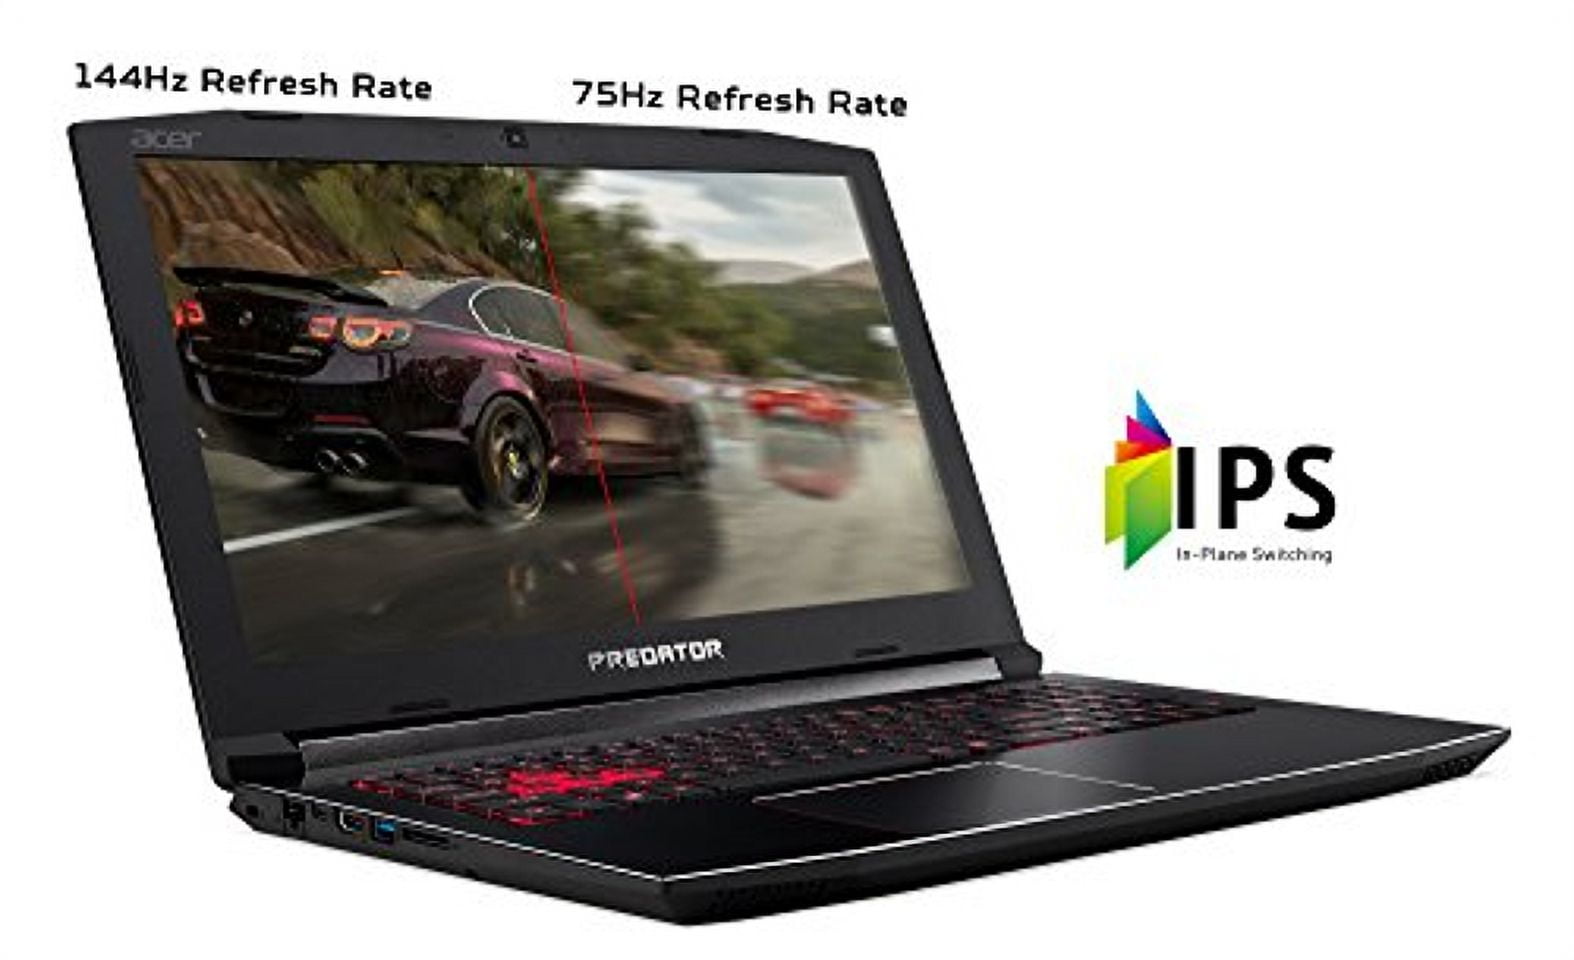 Acer Predator Helios 300 Gaming Laptop PC, 15.6 Full HD 144Hz 3ms IPS  Display, Intel i7-9750H, GeForce RTX 2060 with 6GB, 16GB DDR4, 512GB PCIe  NVMe